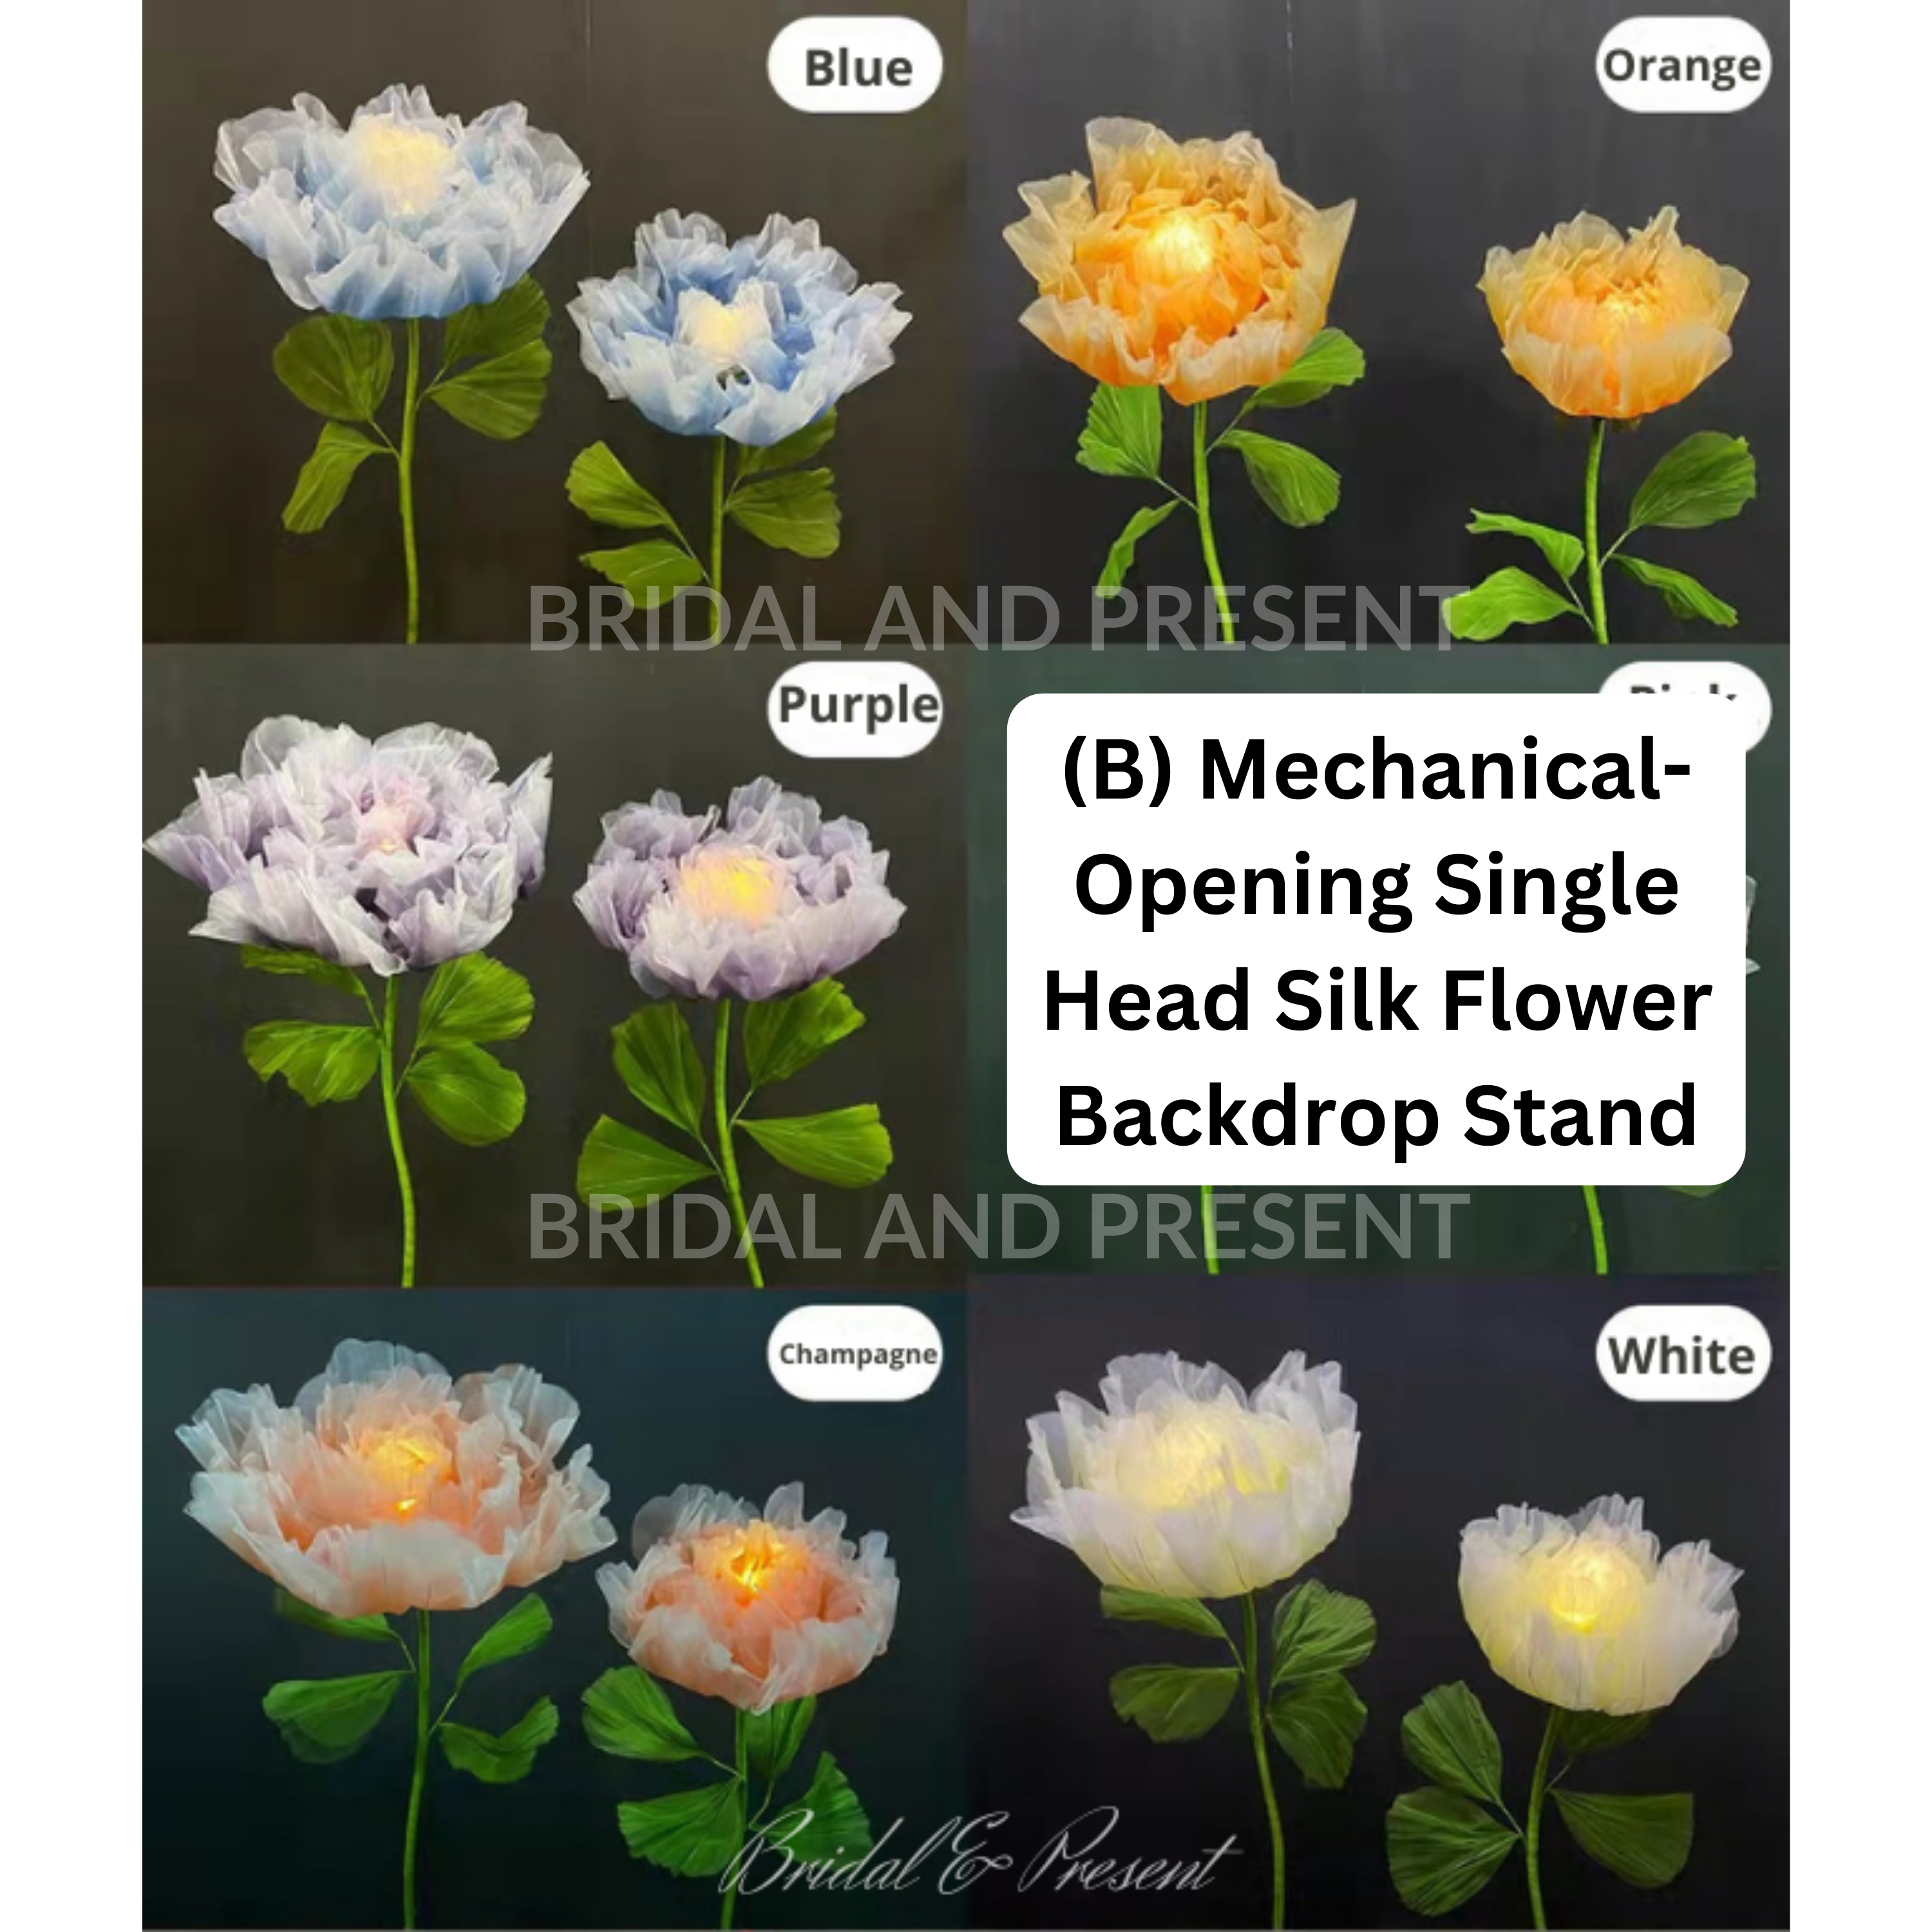 The silk flower arch is a sturdy backdrop stand for beautiful wedding background. It's a collapsible backdrop stand that pairs with wedding altar flower arches.